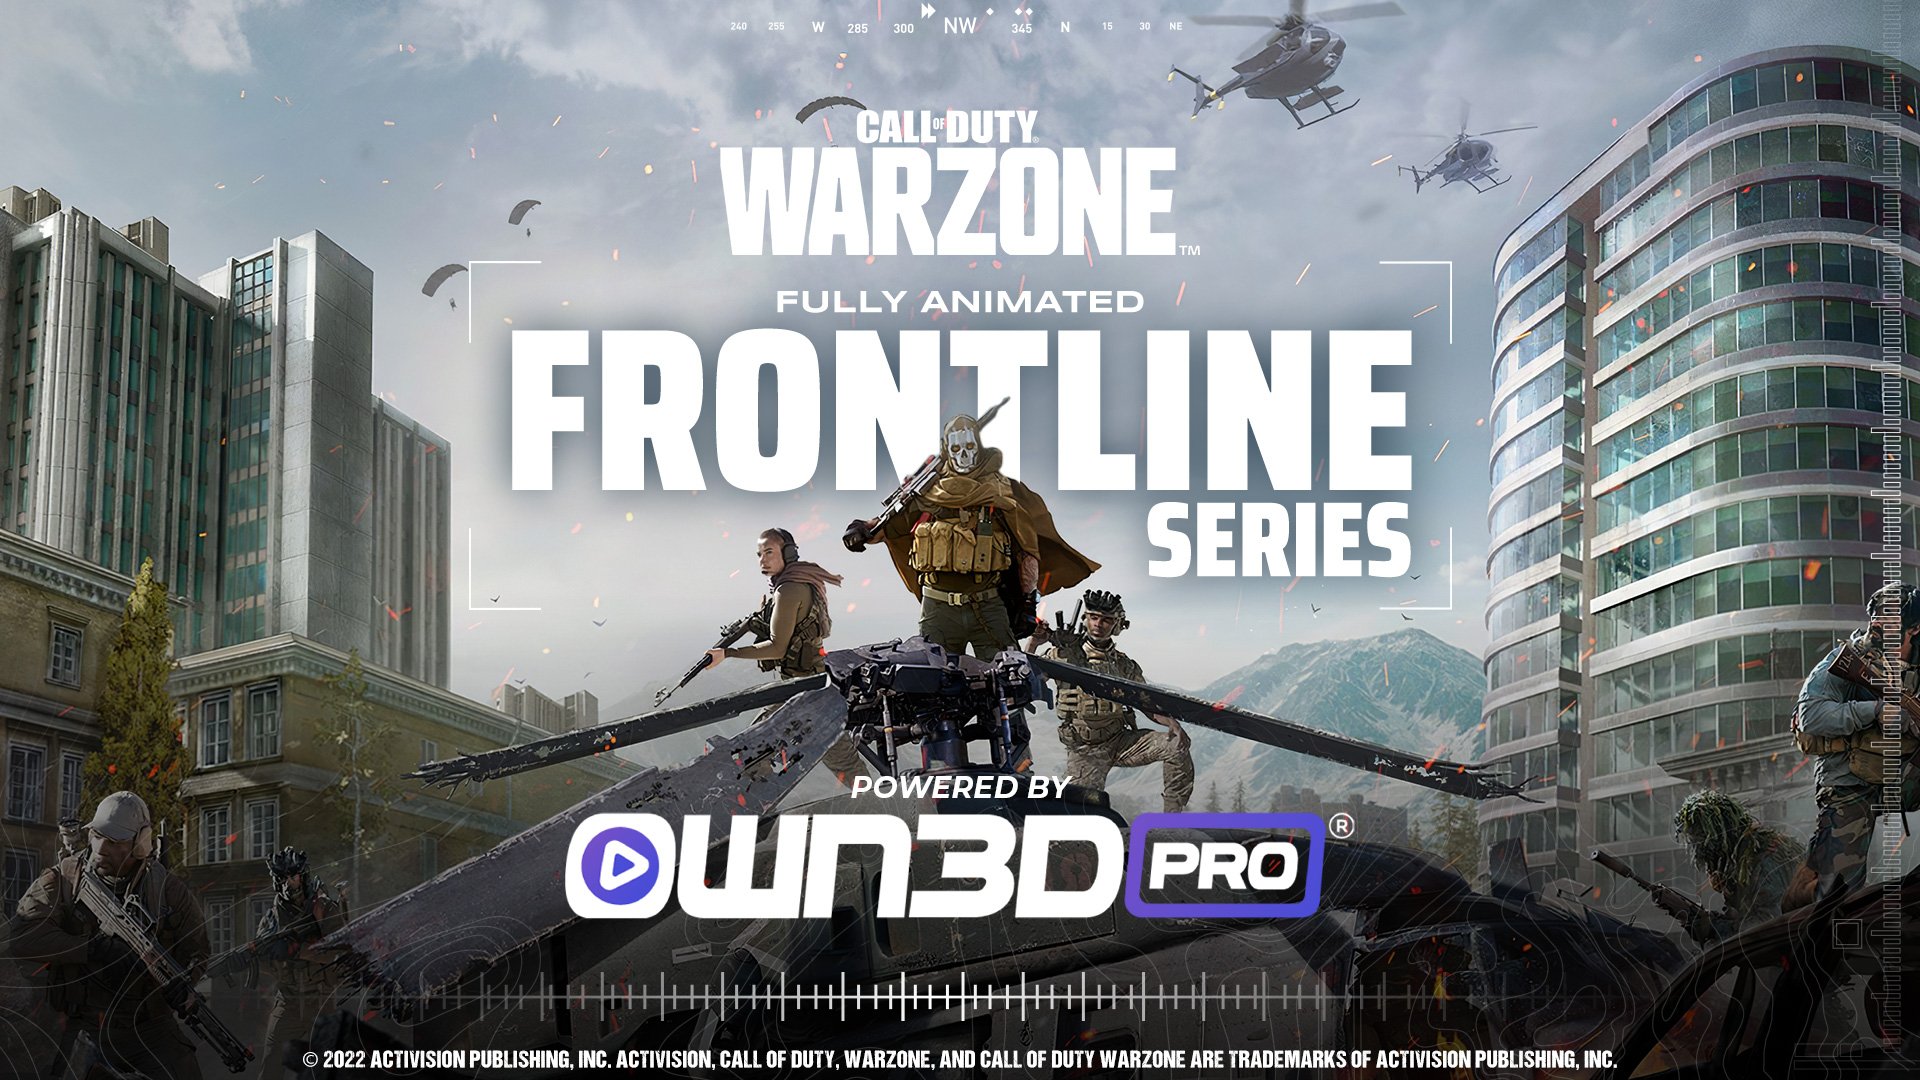 Call of Duty Frontline